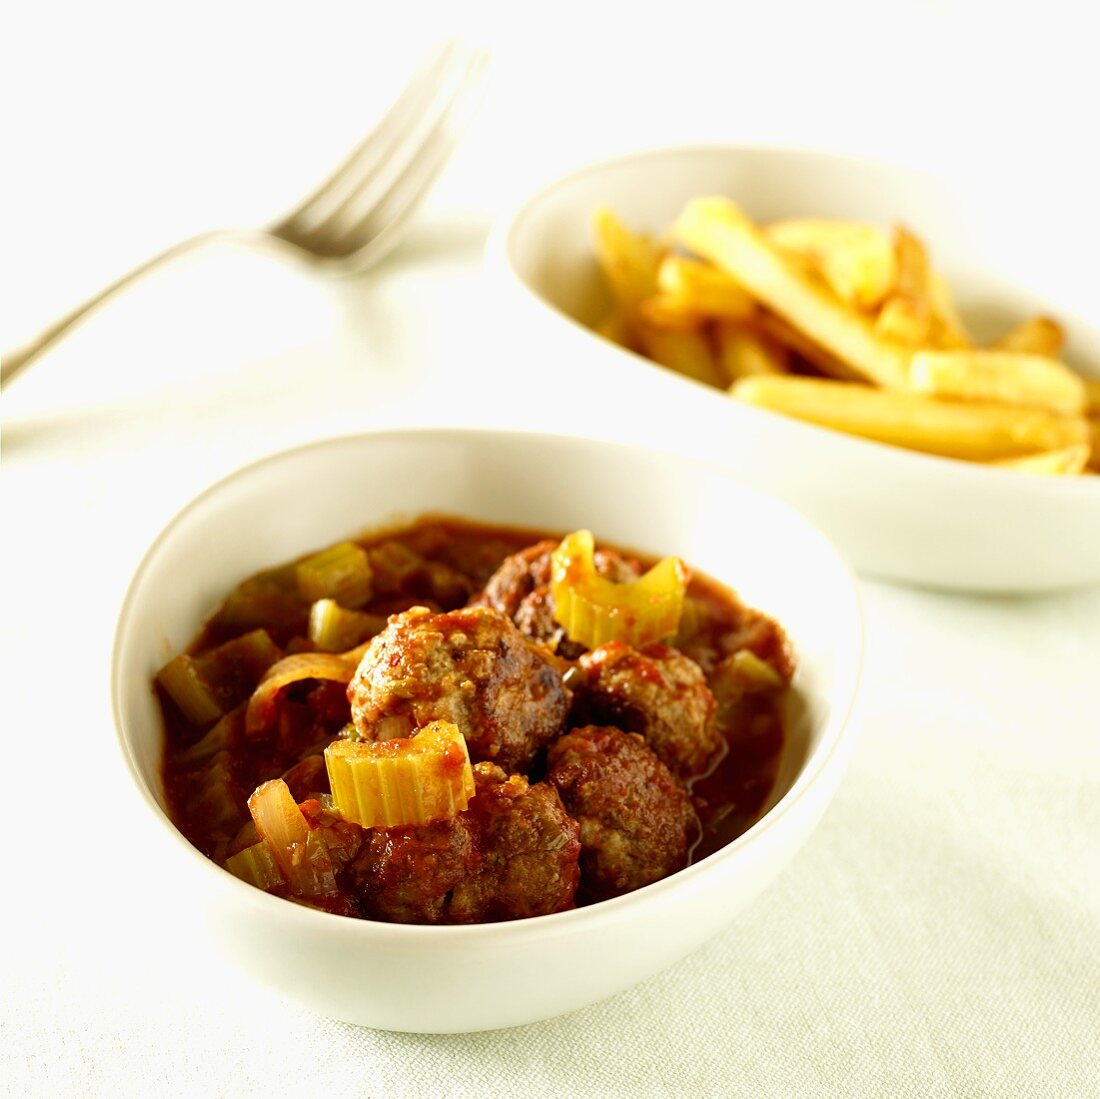 Meatballs in tomato and celery sauce, chips